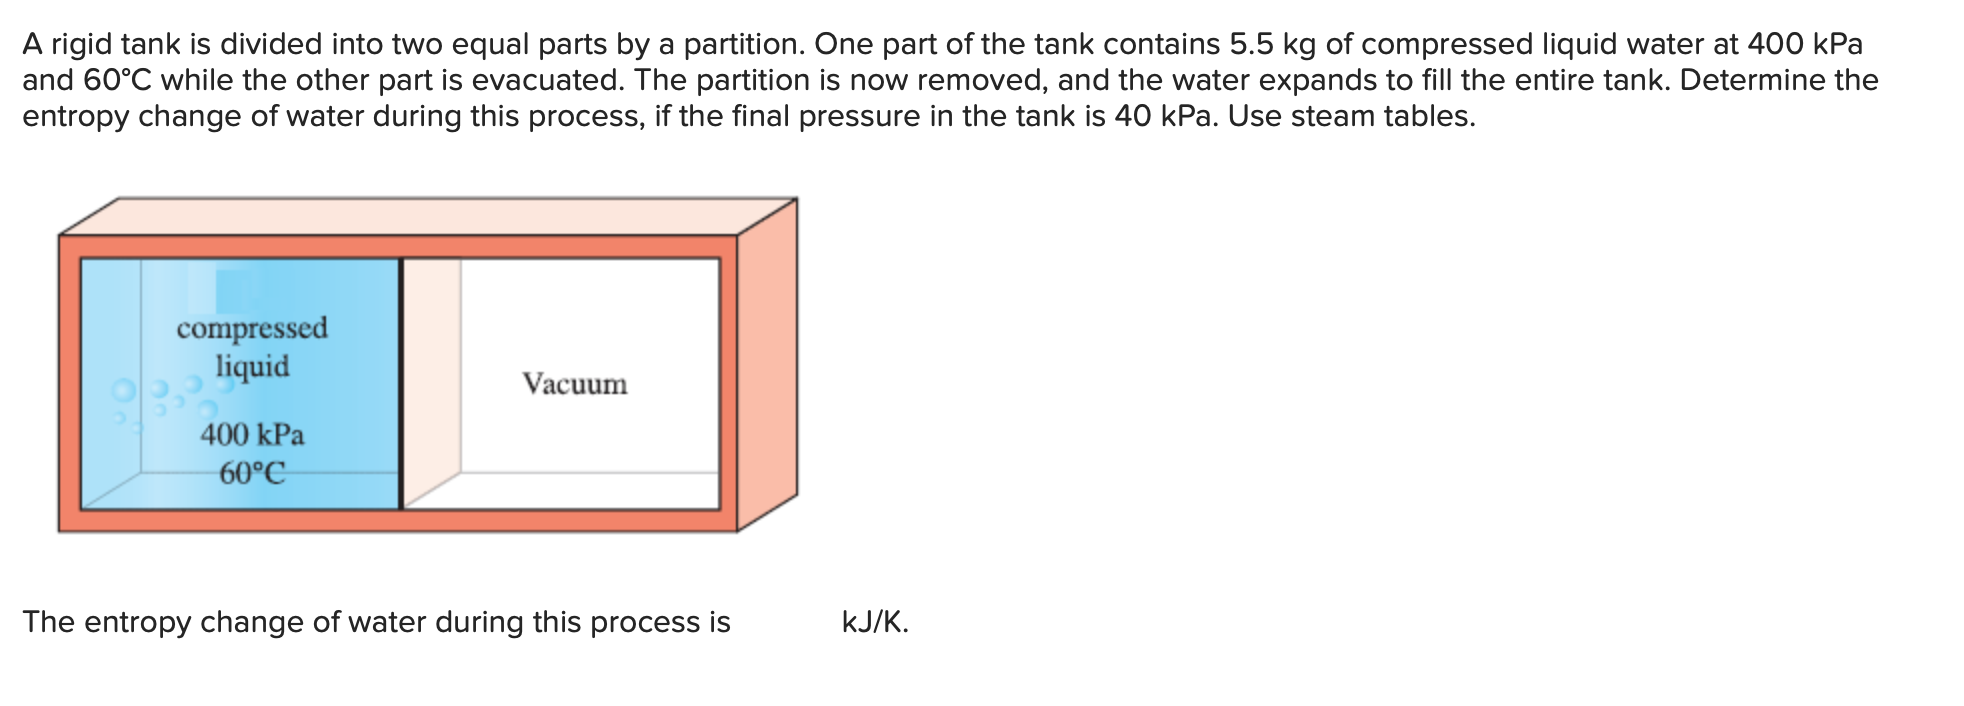 A rigid tank is divided into two equal parts by a partition. One part of the tank contains 5.5 kg of compressed liquid water at 400 kPa
and 60°C while the other part is evacuated. The partition is now removed, and the water expands to fill the entire tank. Determine the
entropy change of water during this process, if the final pressure in the tank is 40 kPa. Use steam tables.
compressed
liquid
Vacuum
400 kPa
60°C
kJ/K
The entropy change of water during this process is
